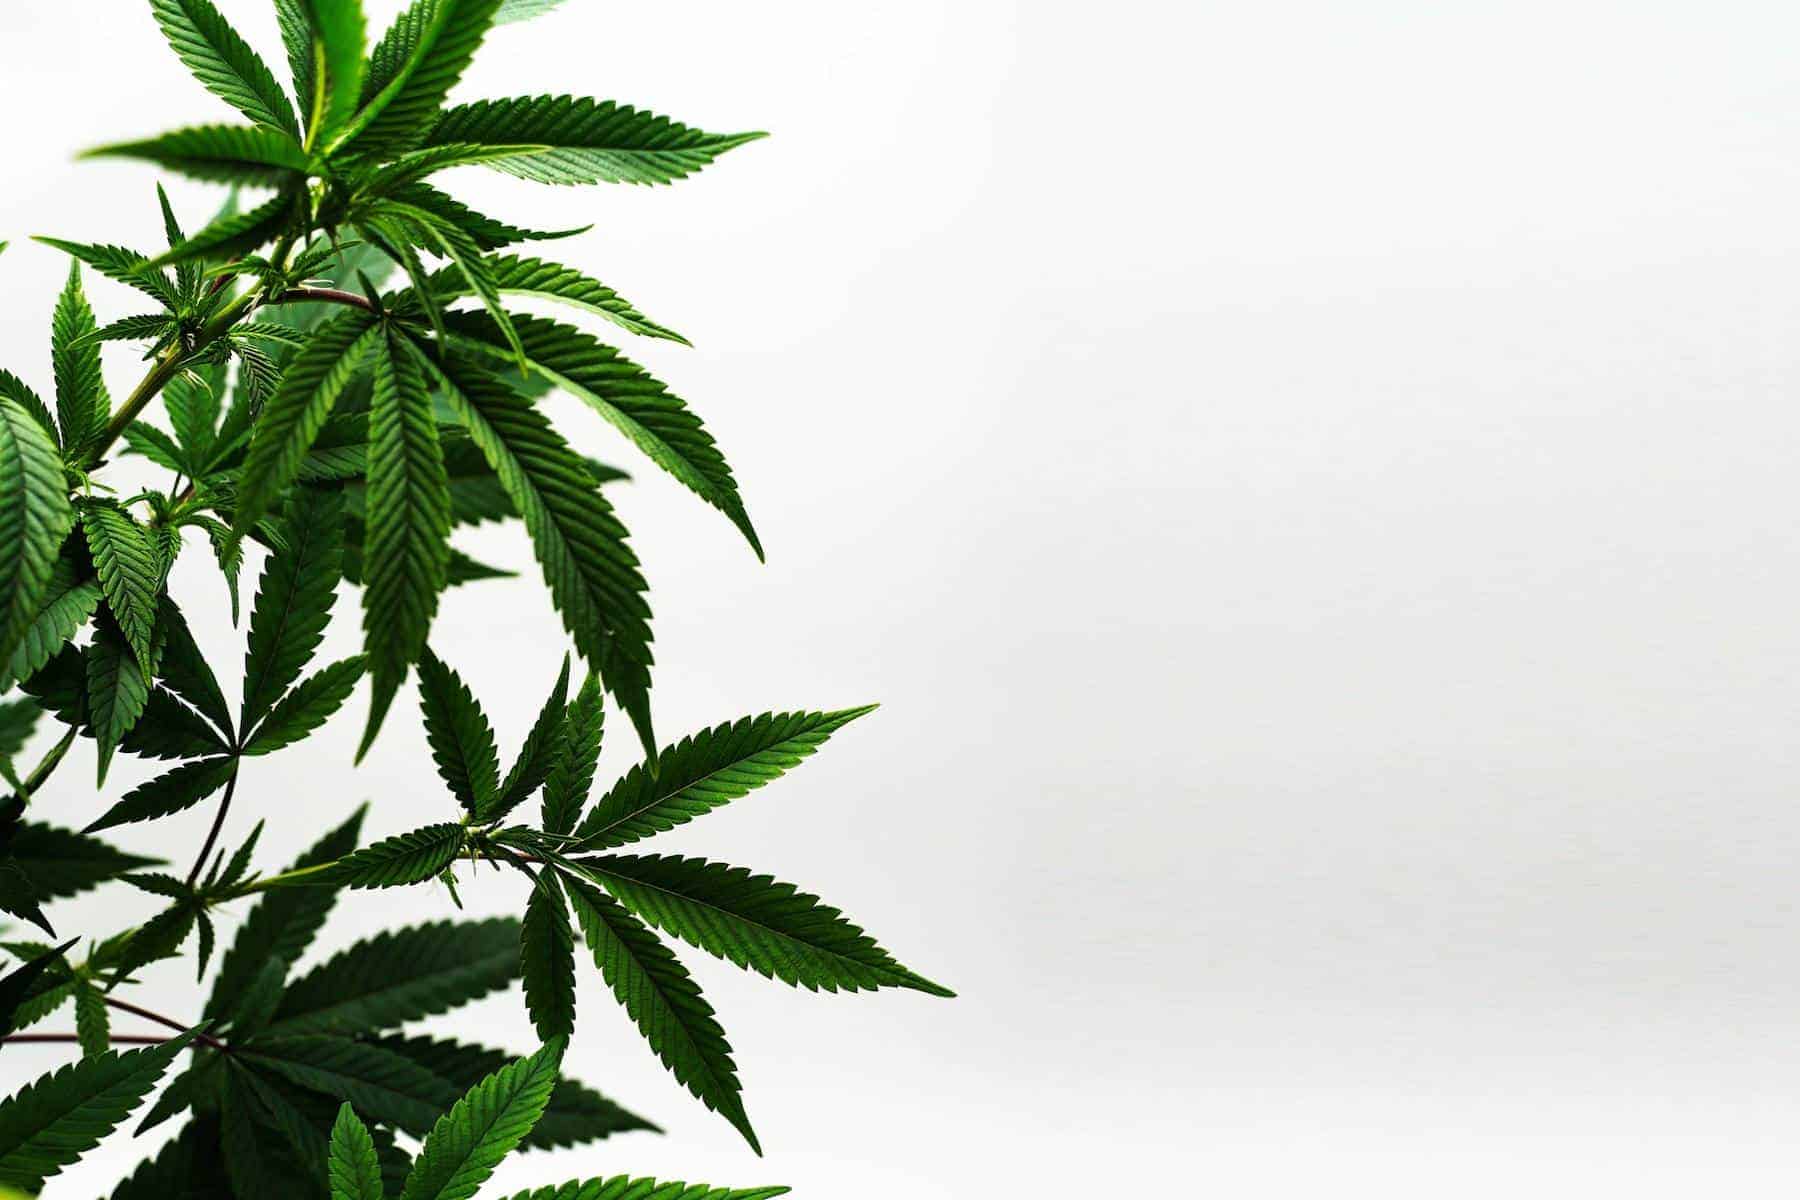 green cannabis leaves isolated on white, how to fight phobias with delta-8